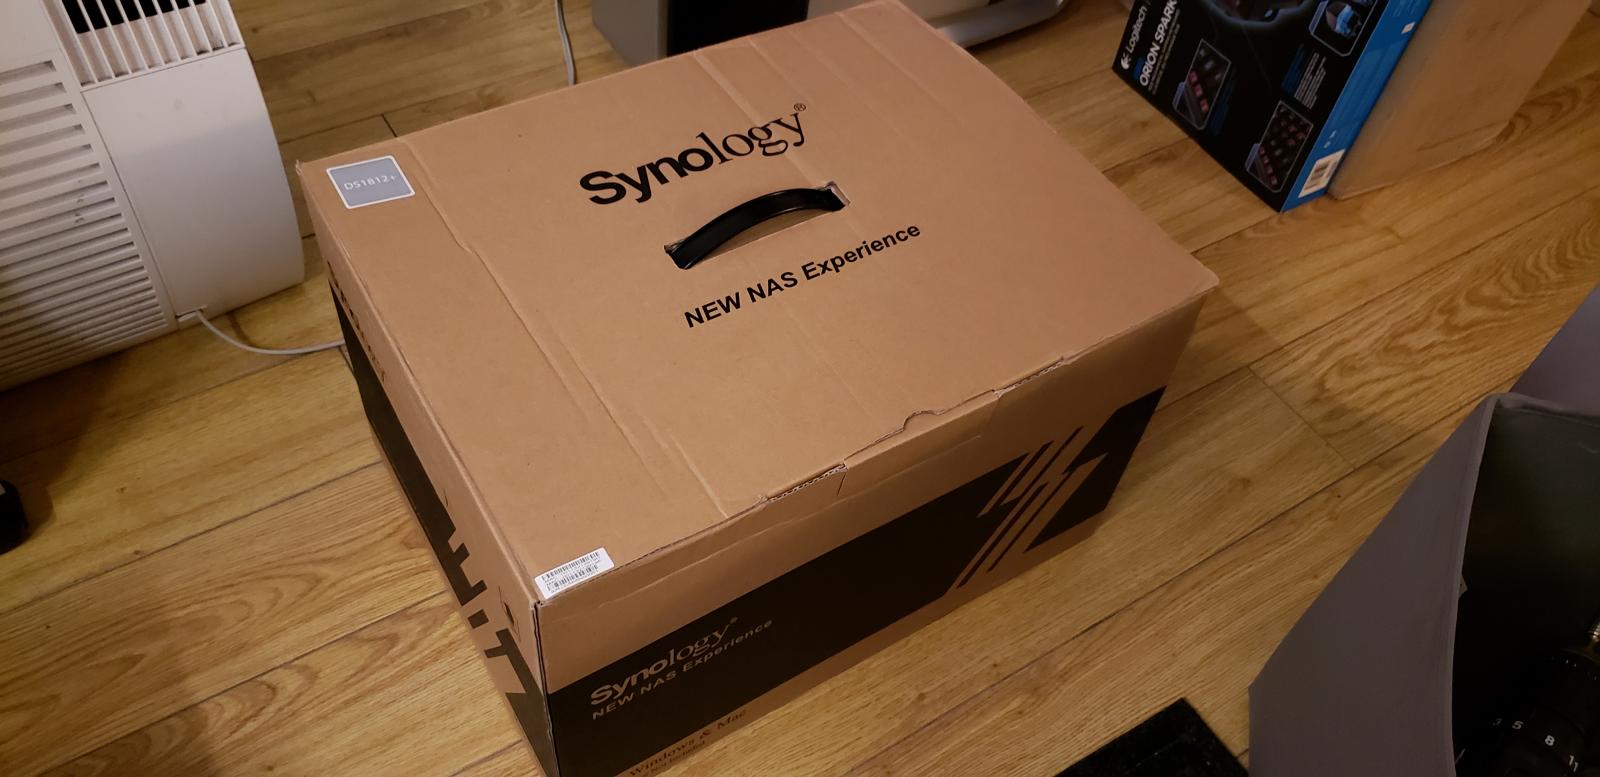 For sale Synology DiskStation 1812+ 8-bay NAS appliance (3GB RAM)